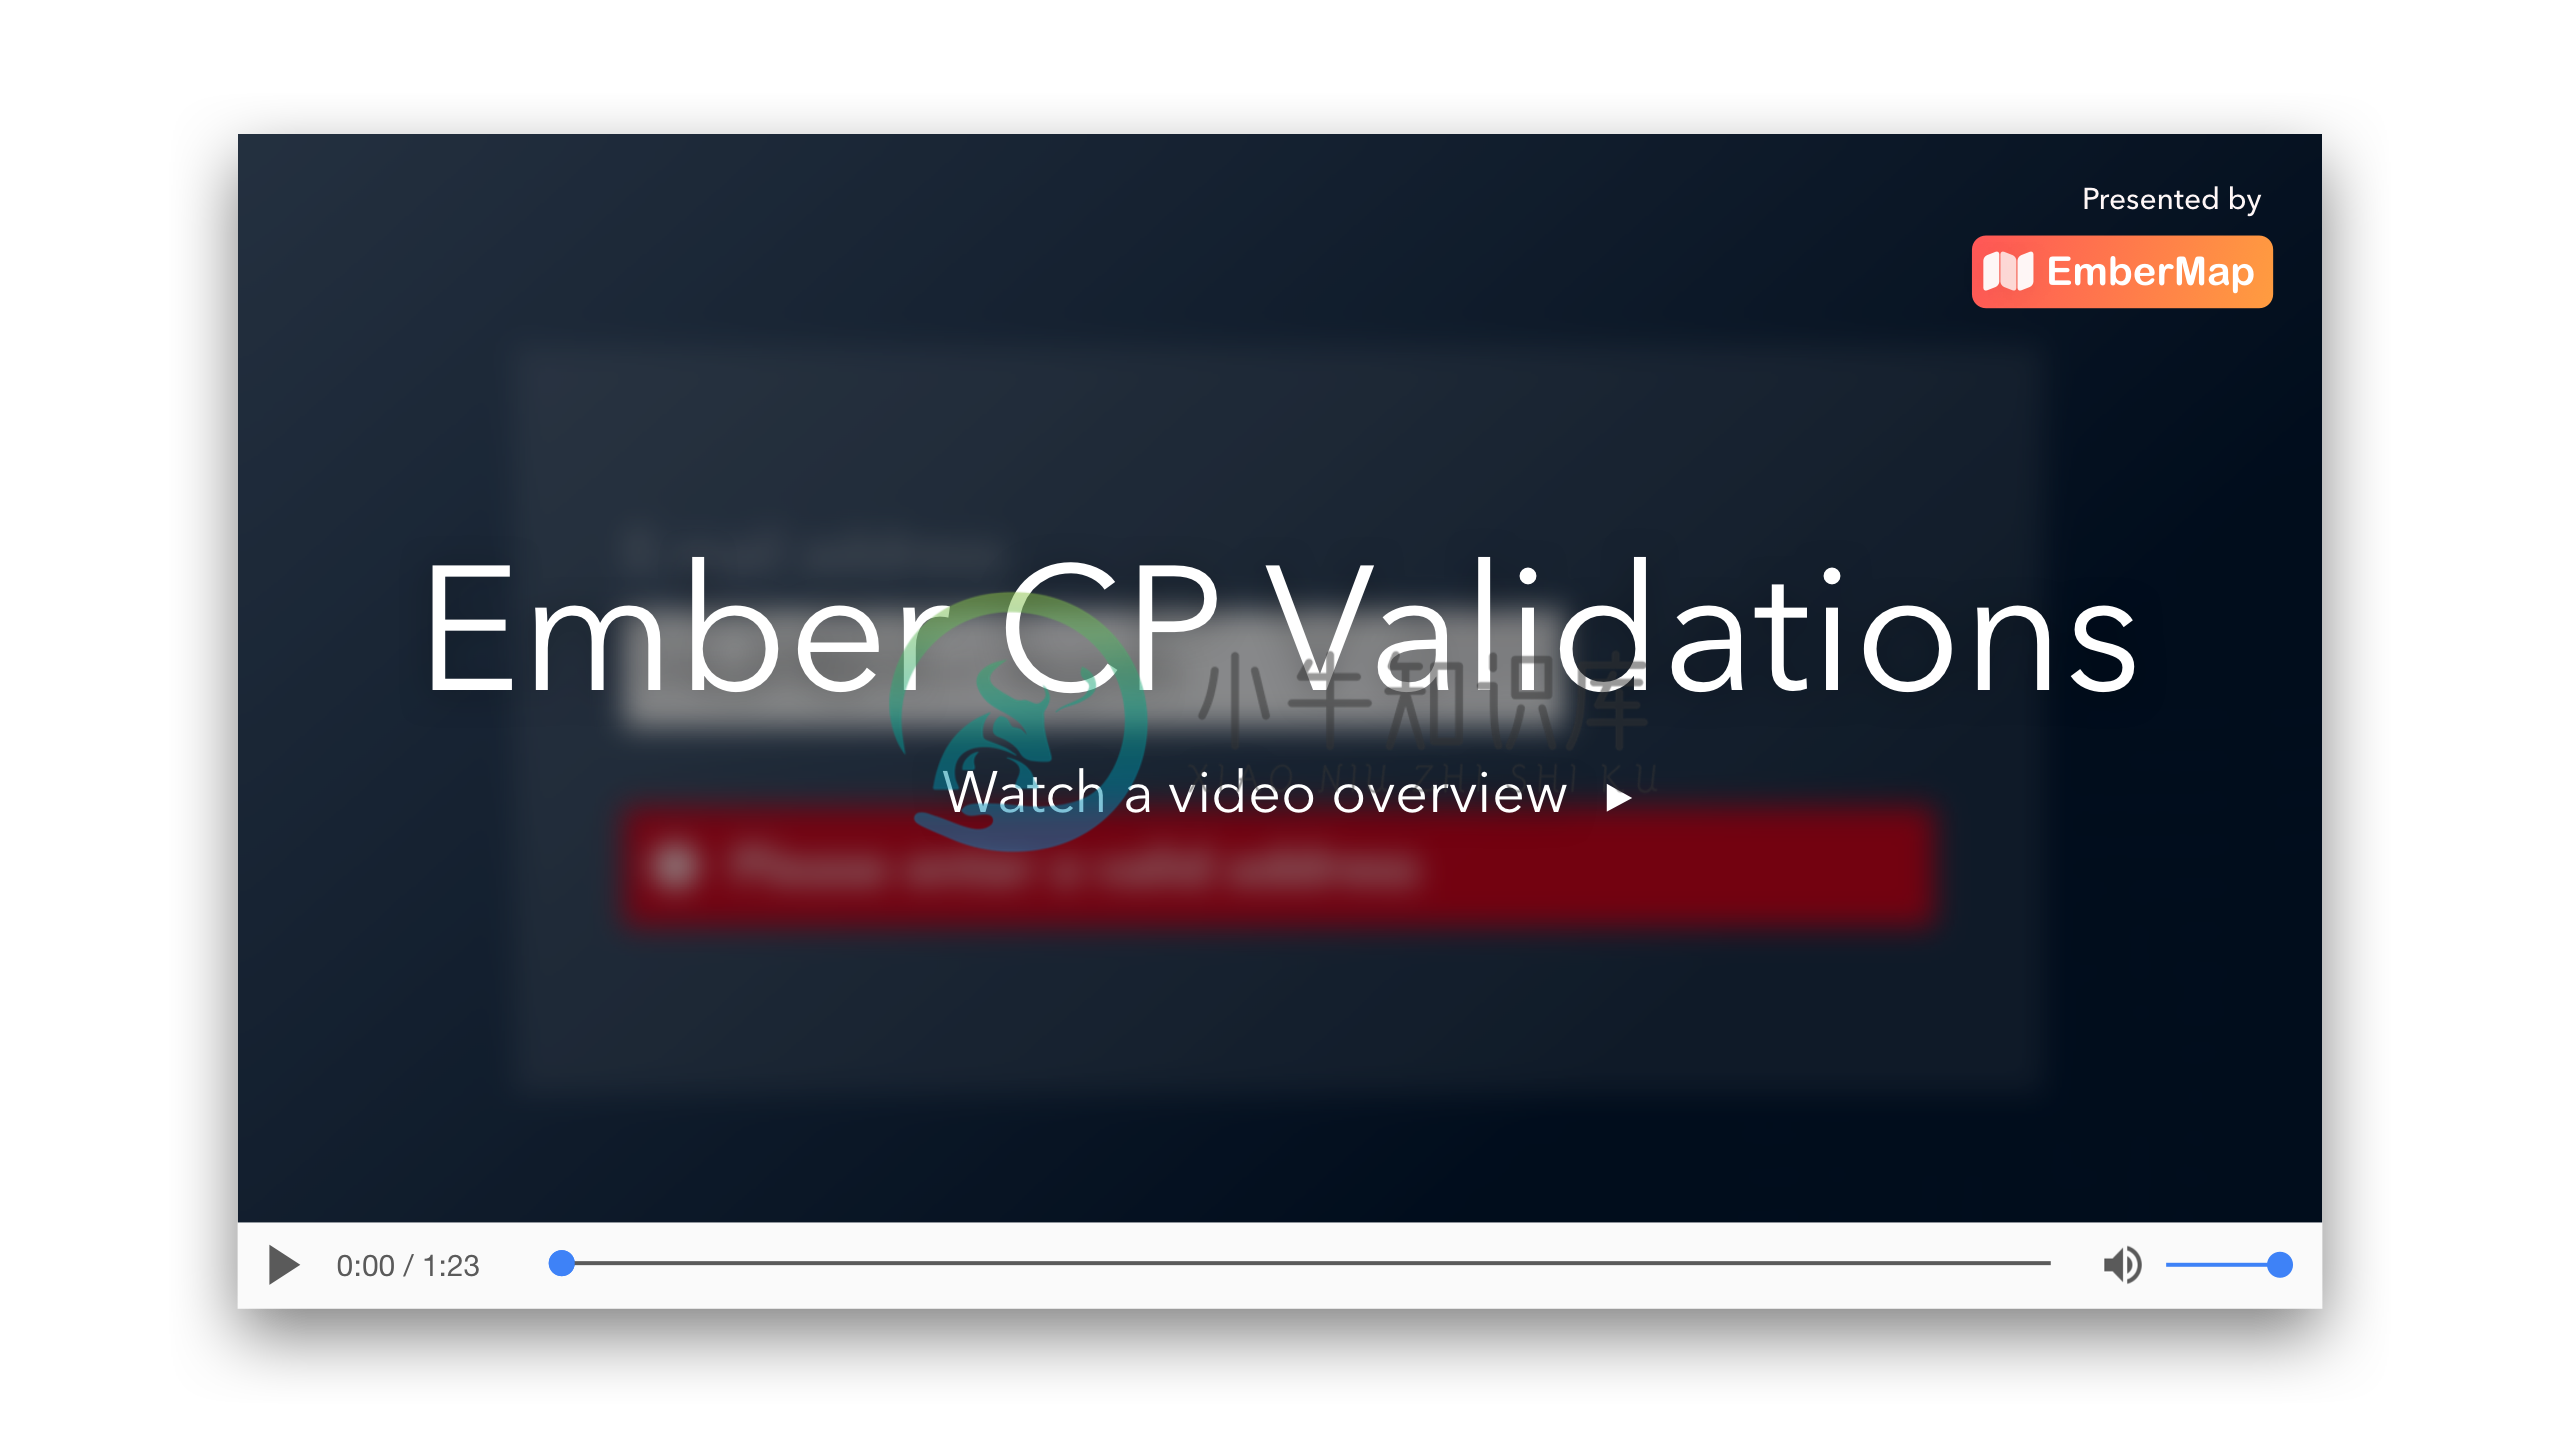 Introduction to Ember CP Validations